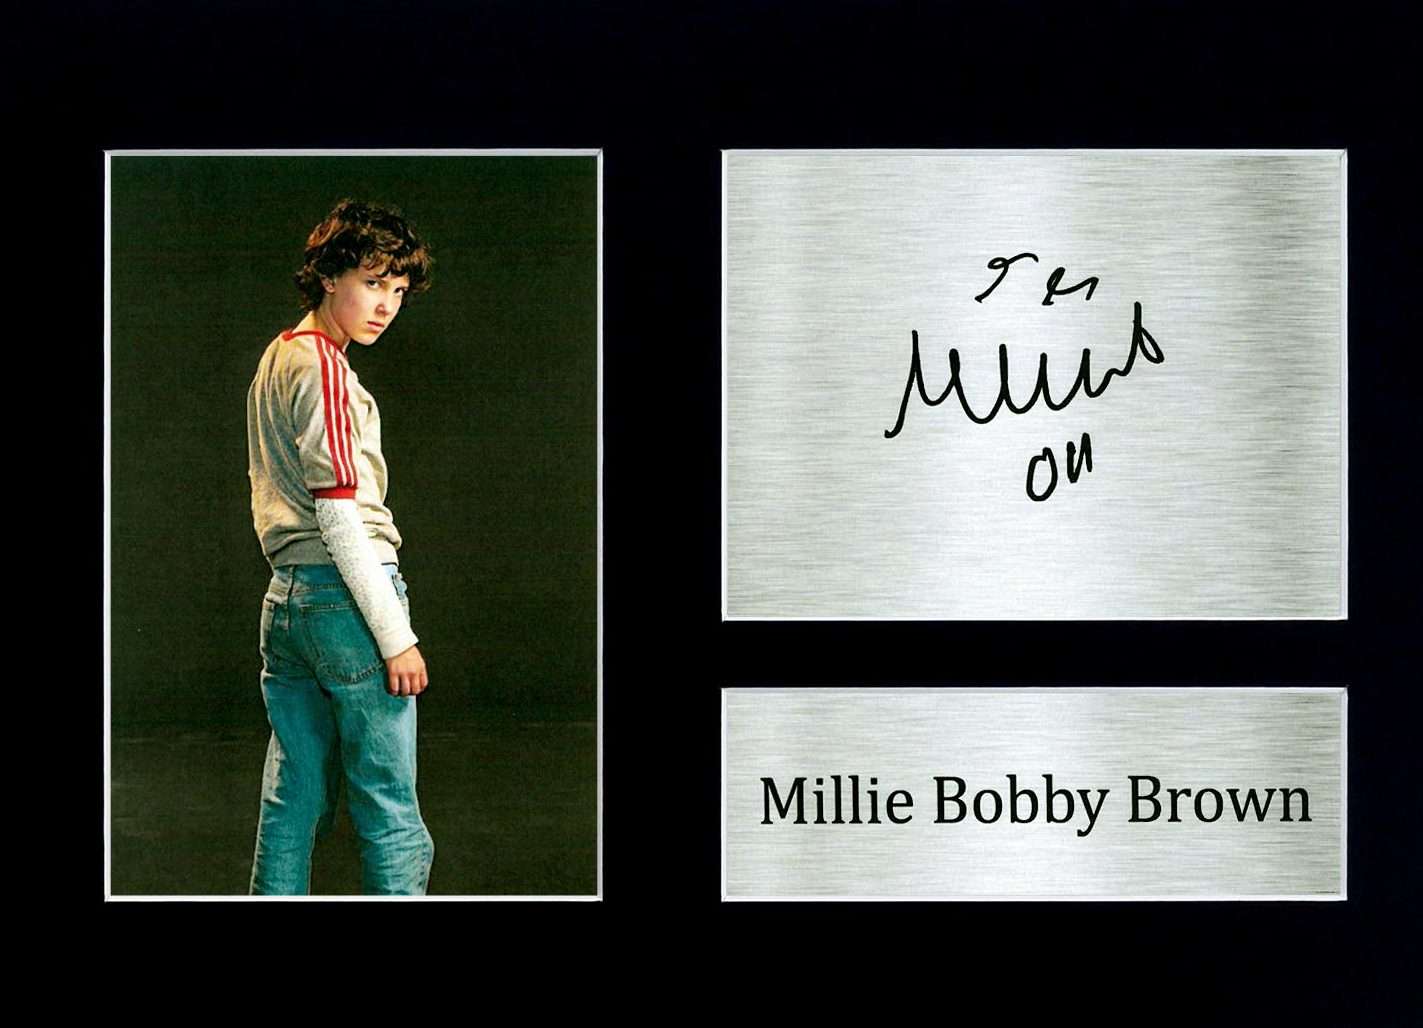 Autograph of Millie Bobby Brown